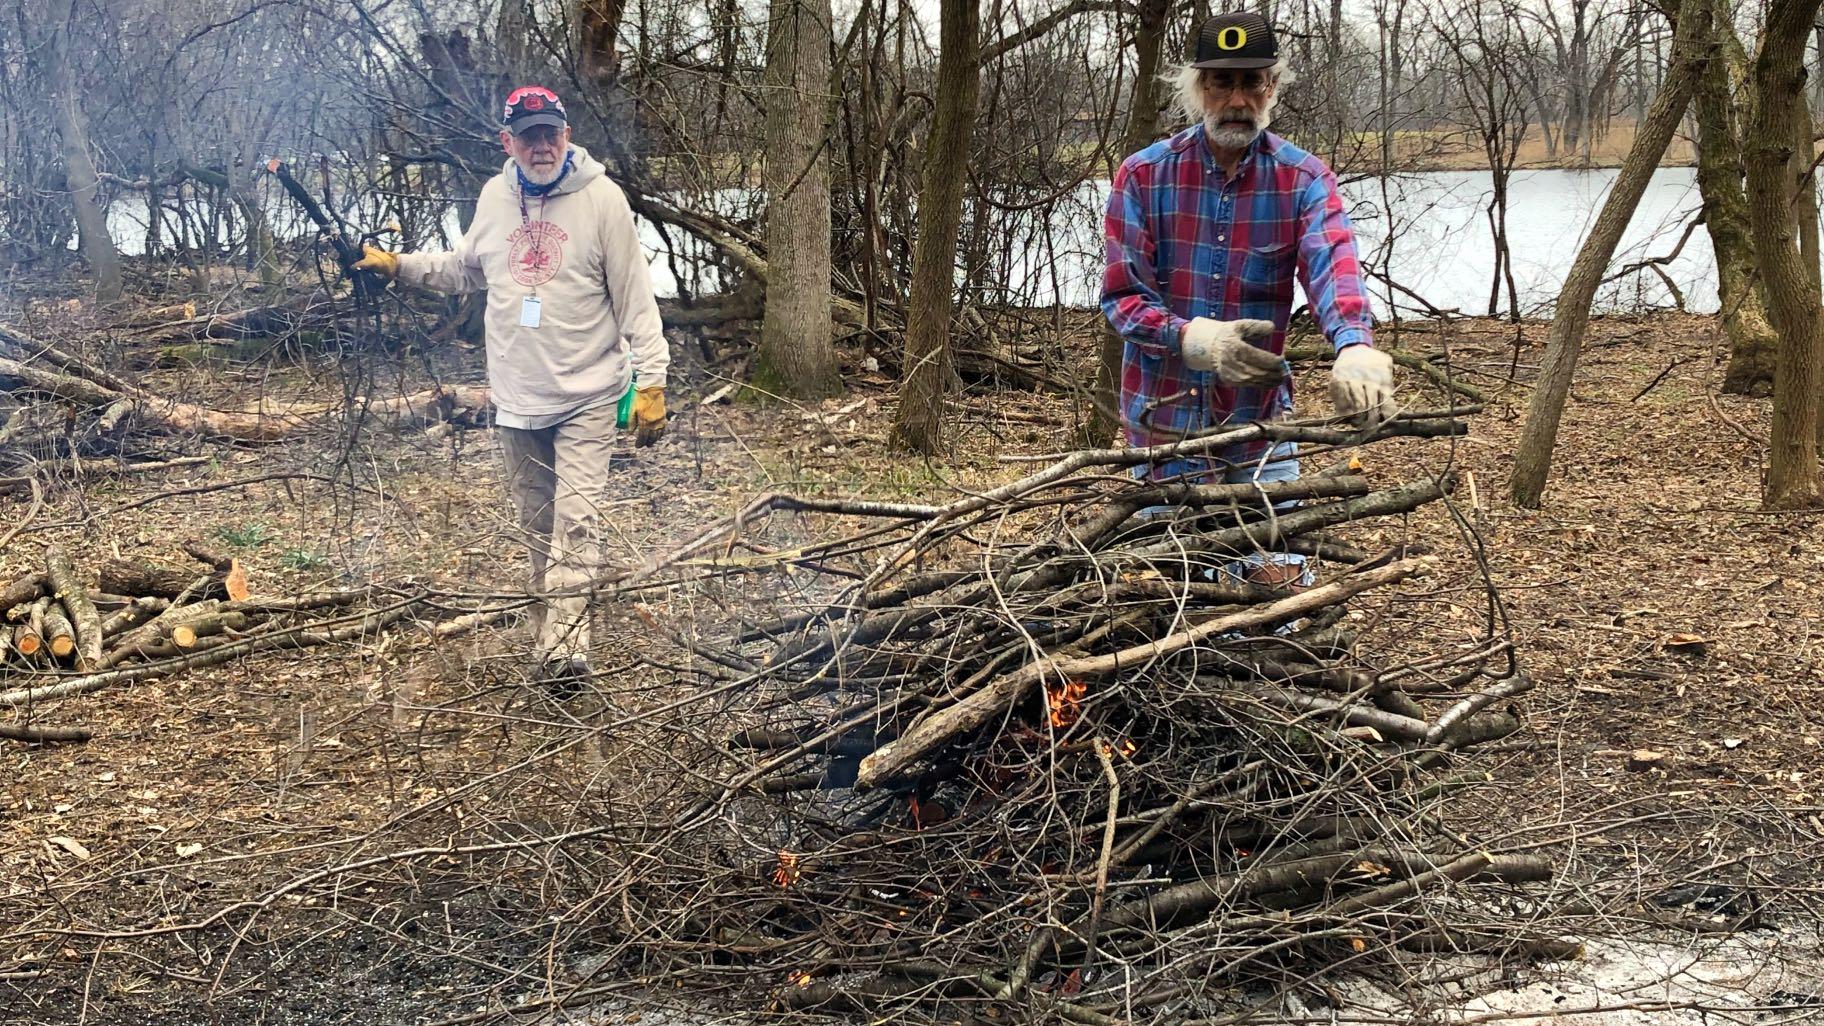 Longtime volunteers Gary Morrissey and Dan Goodwin have stird up a pile of burning buckthorn. (Patty Wetli / WTTW News)